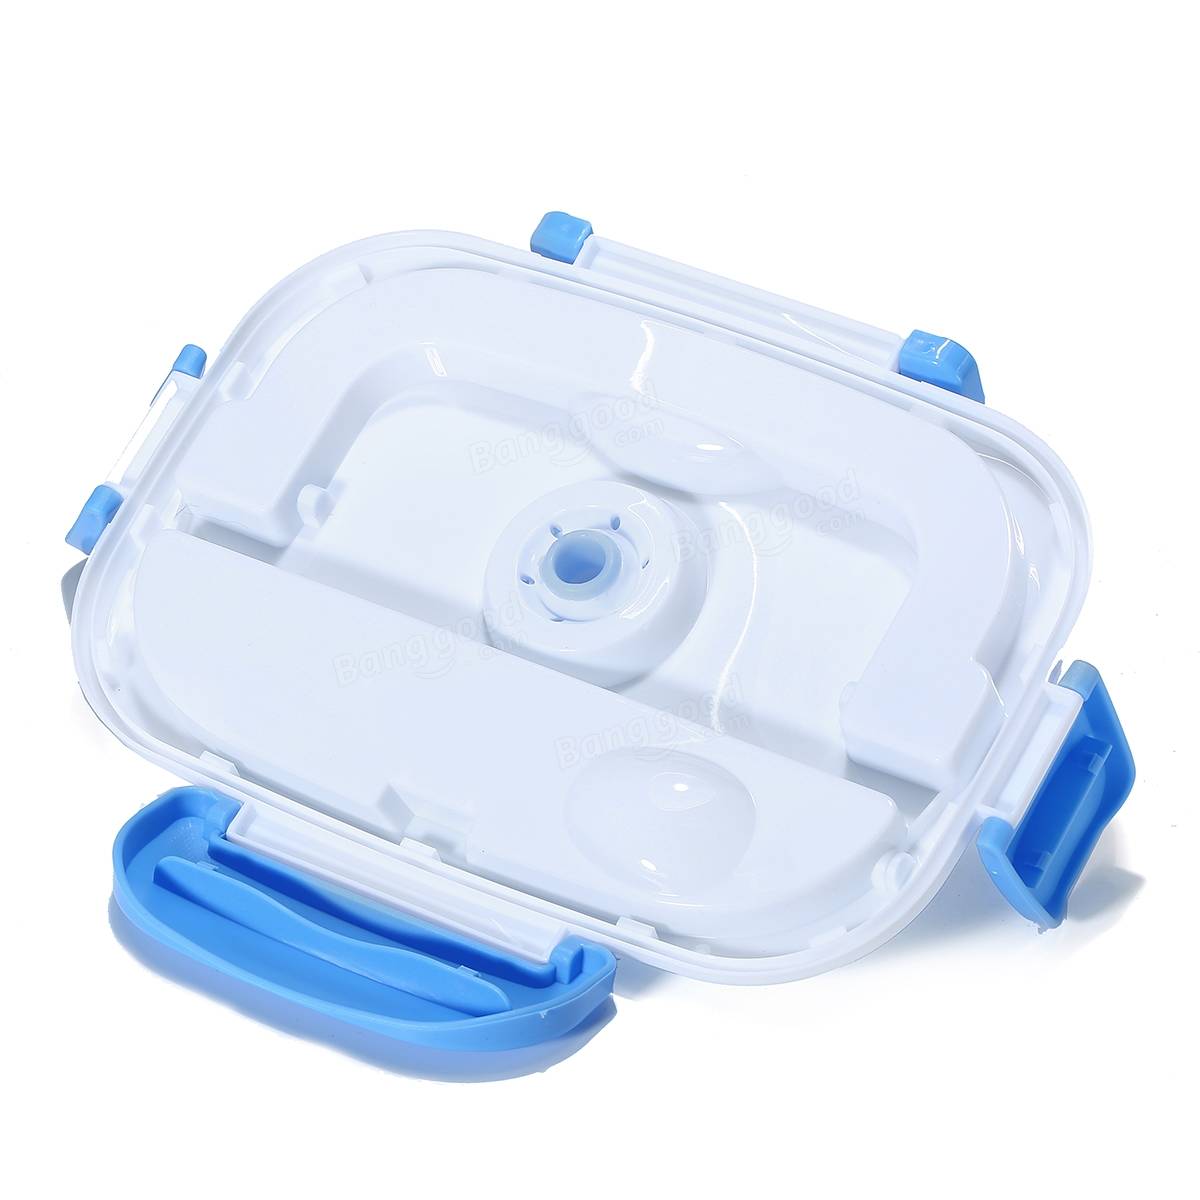 Portable Electric Insulated Cars Carry Heating Lunch Box Storage Food Container